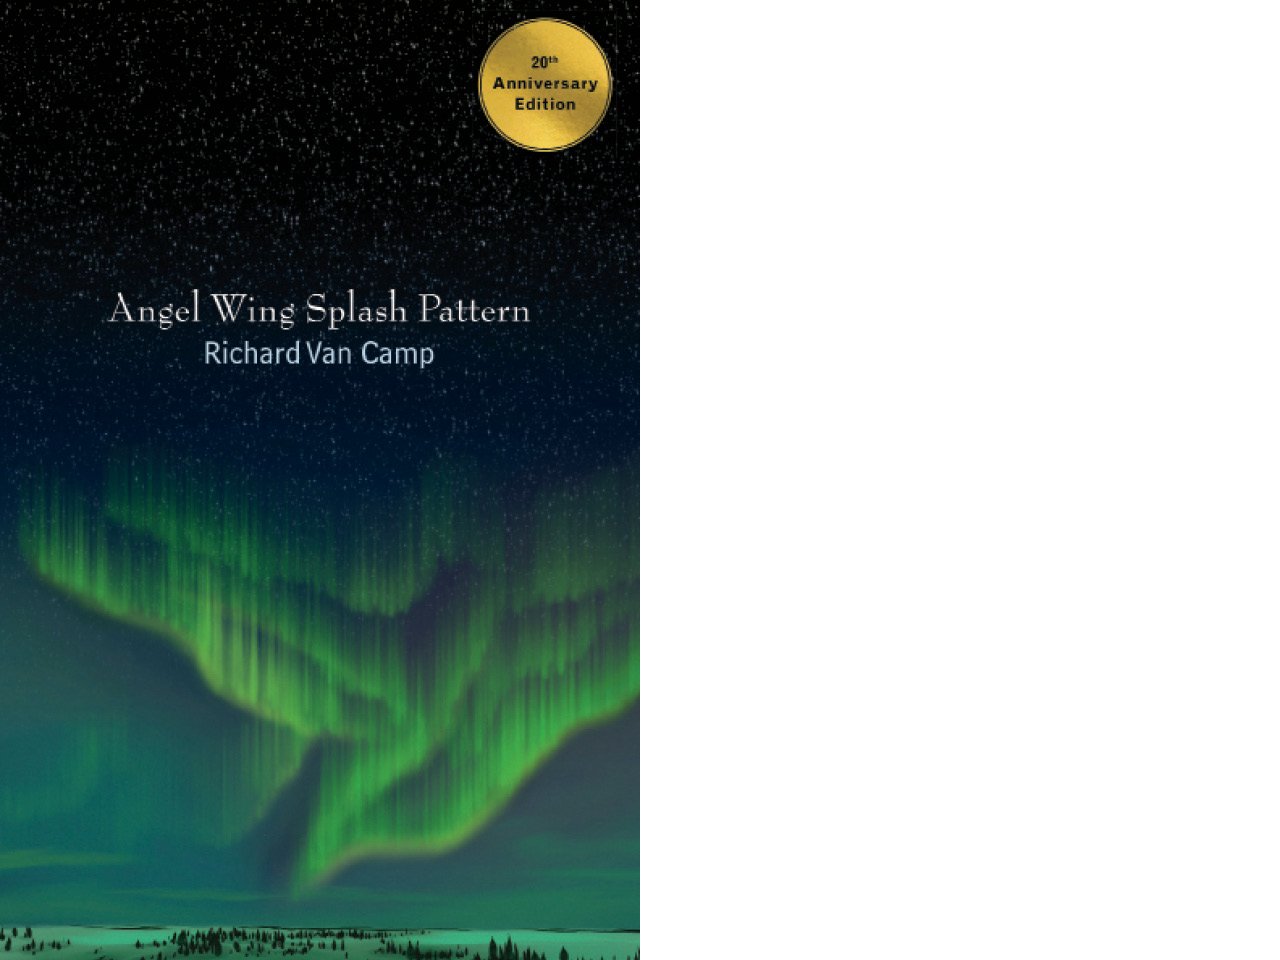 The cover of Angel Wing Splash Pattern